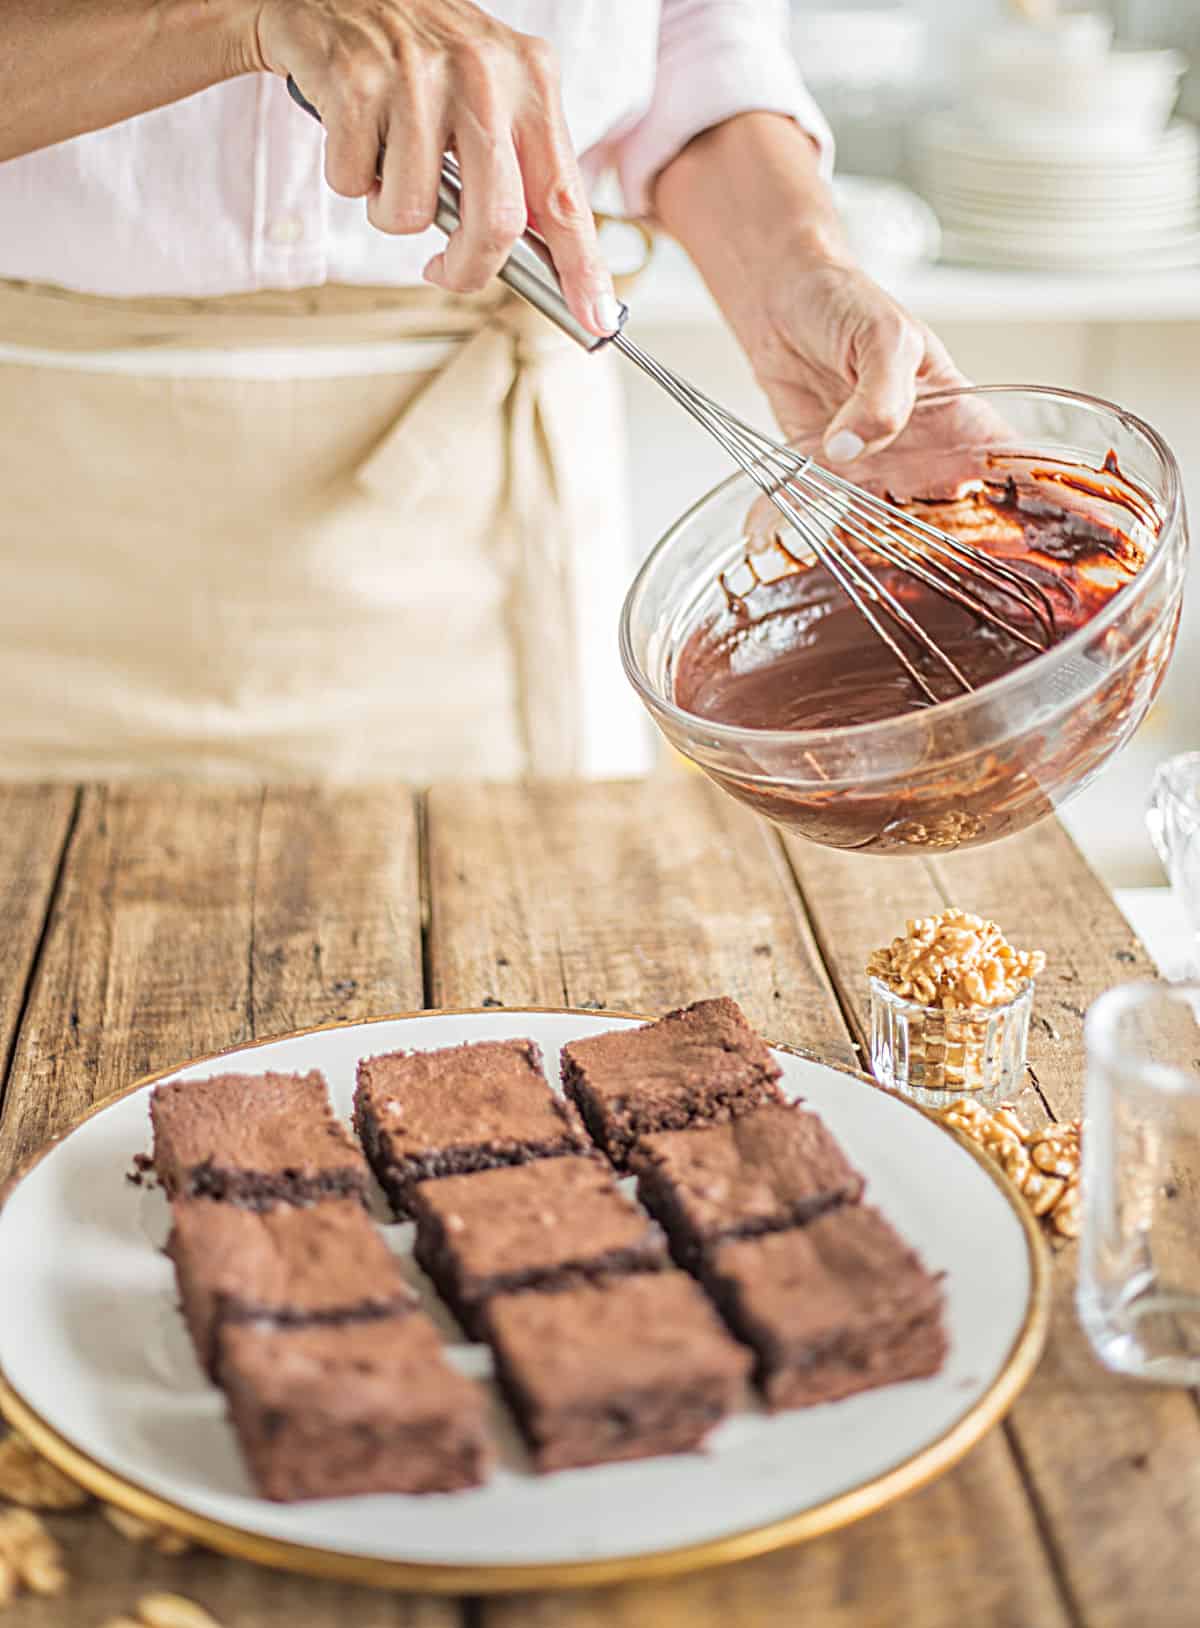 Person with pink and beige apron beating chocolate sauce with plate of brownies below on wooden table